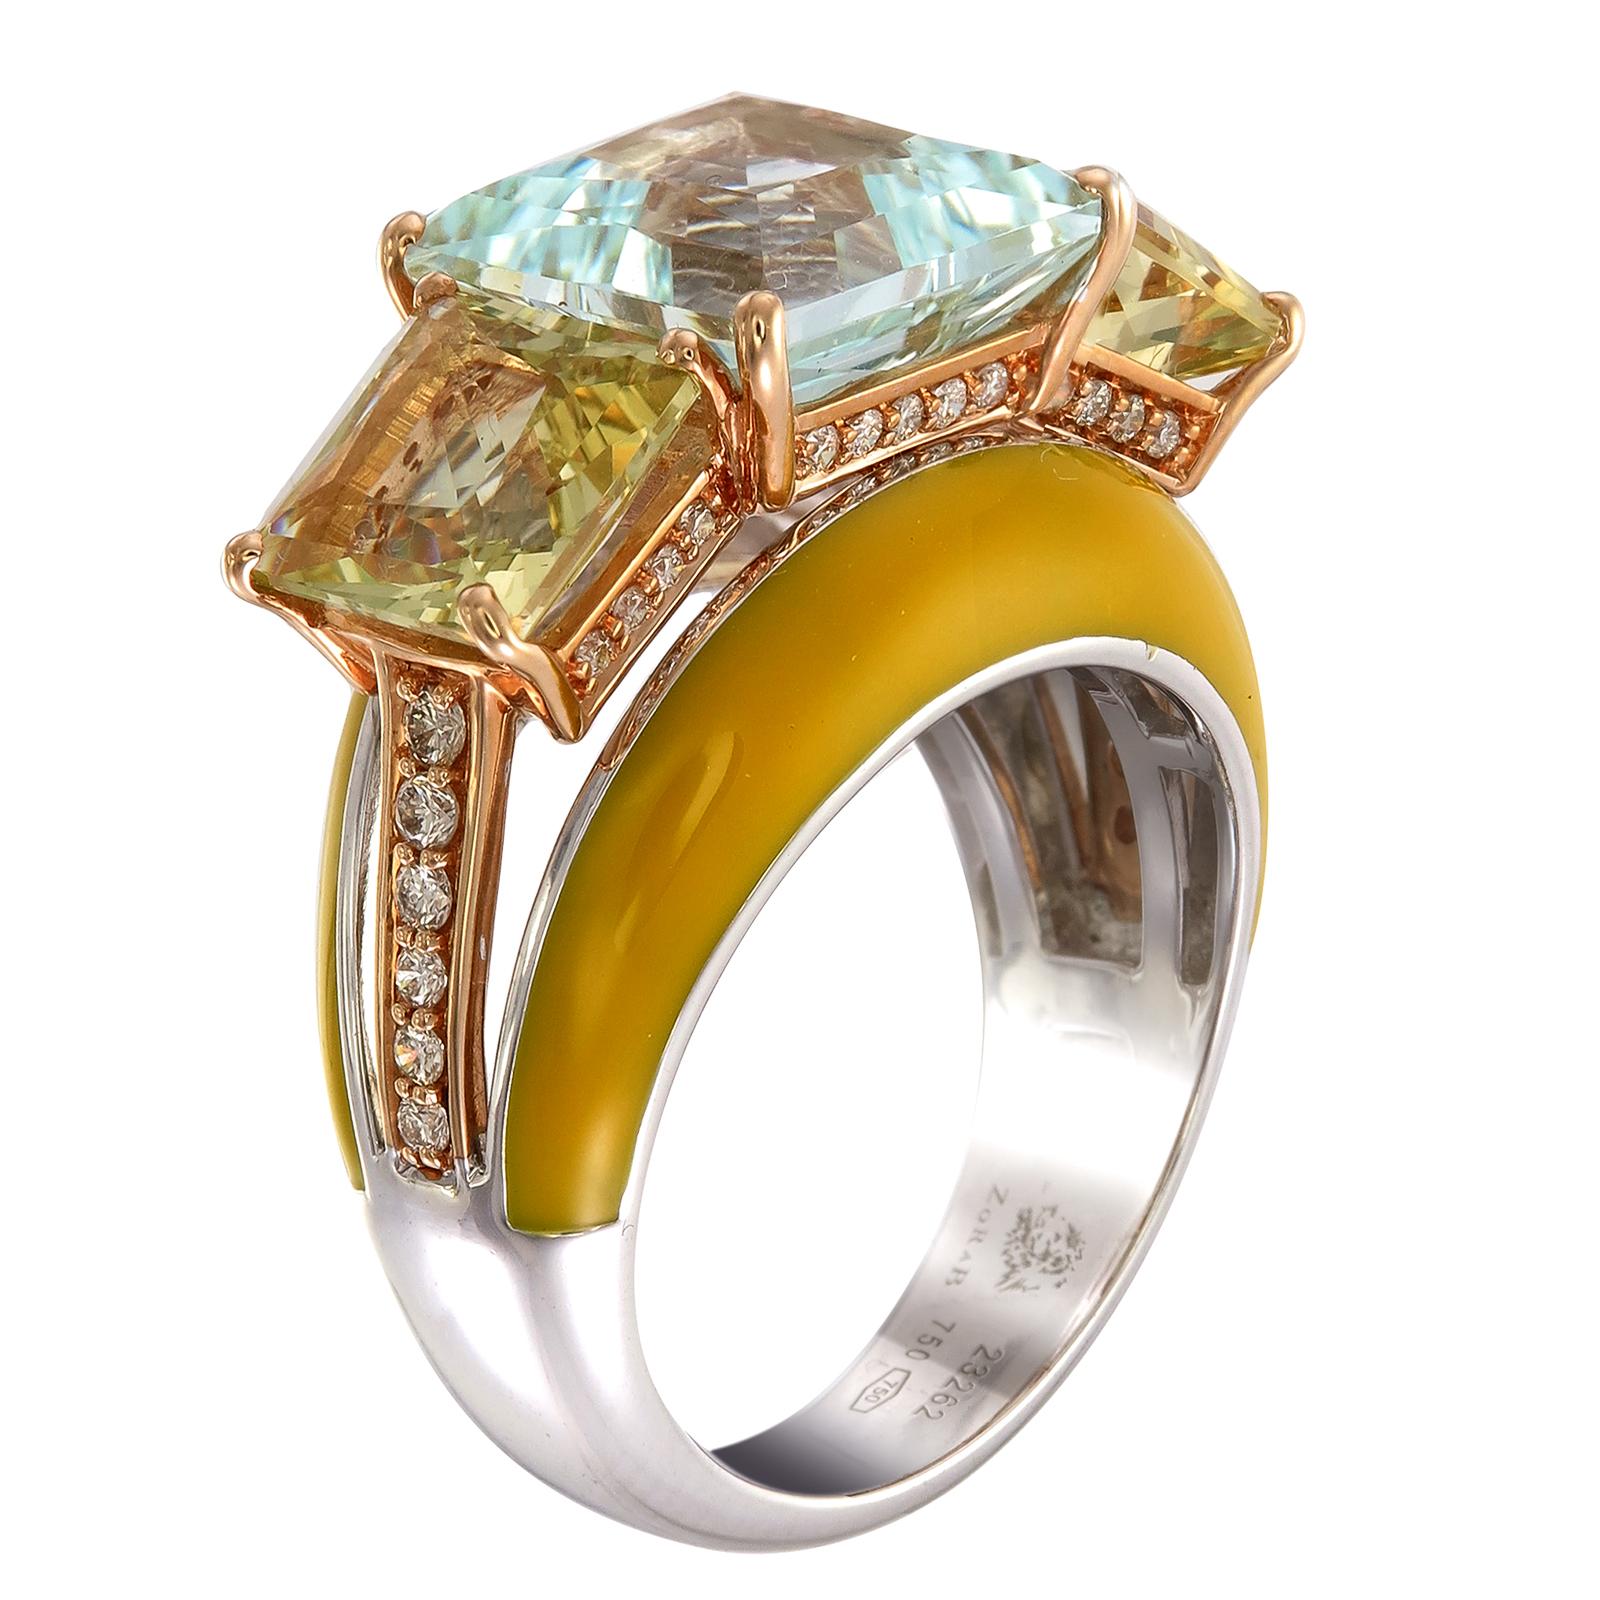 For those who want to make a statement, a 5.35-carat cushion-cut Aquamarine Beryl is flanked by two cushion-cut Yellow Beryls on a 18K Yellow Gold and Palladium ring. An added touch of yellow enamel completes the jewel.

This ring, as with all Zorab